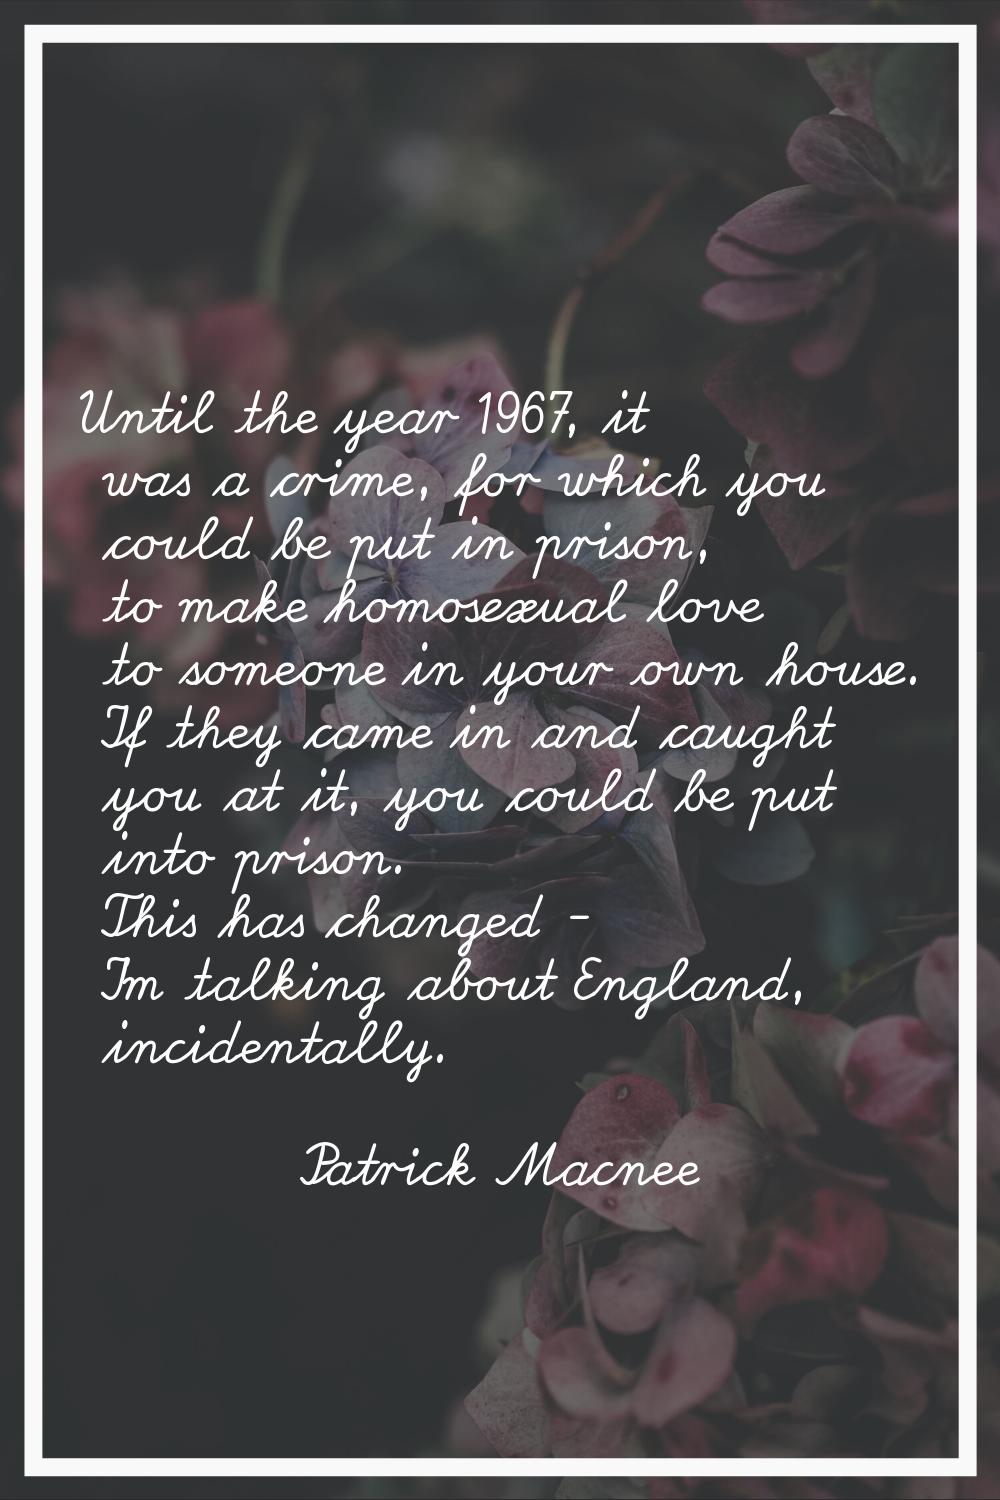 Until the year 1967, it was a crime, for which you could be put in prison, to make homosexual love 